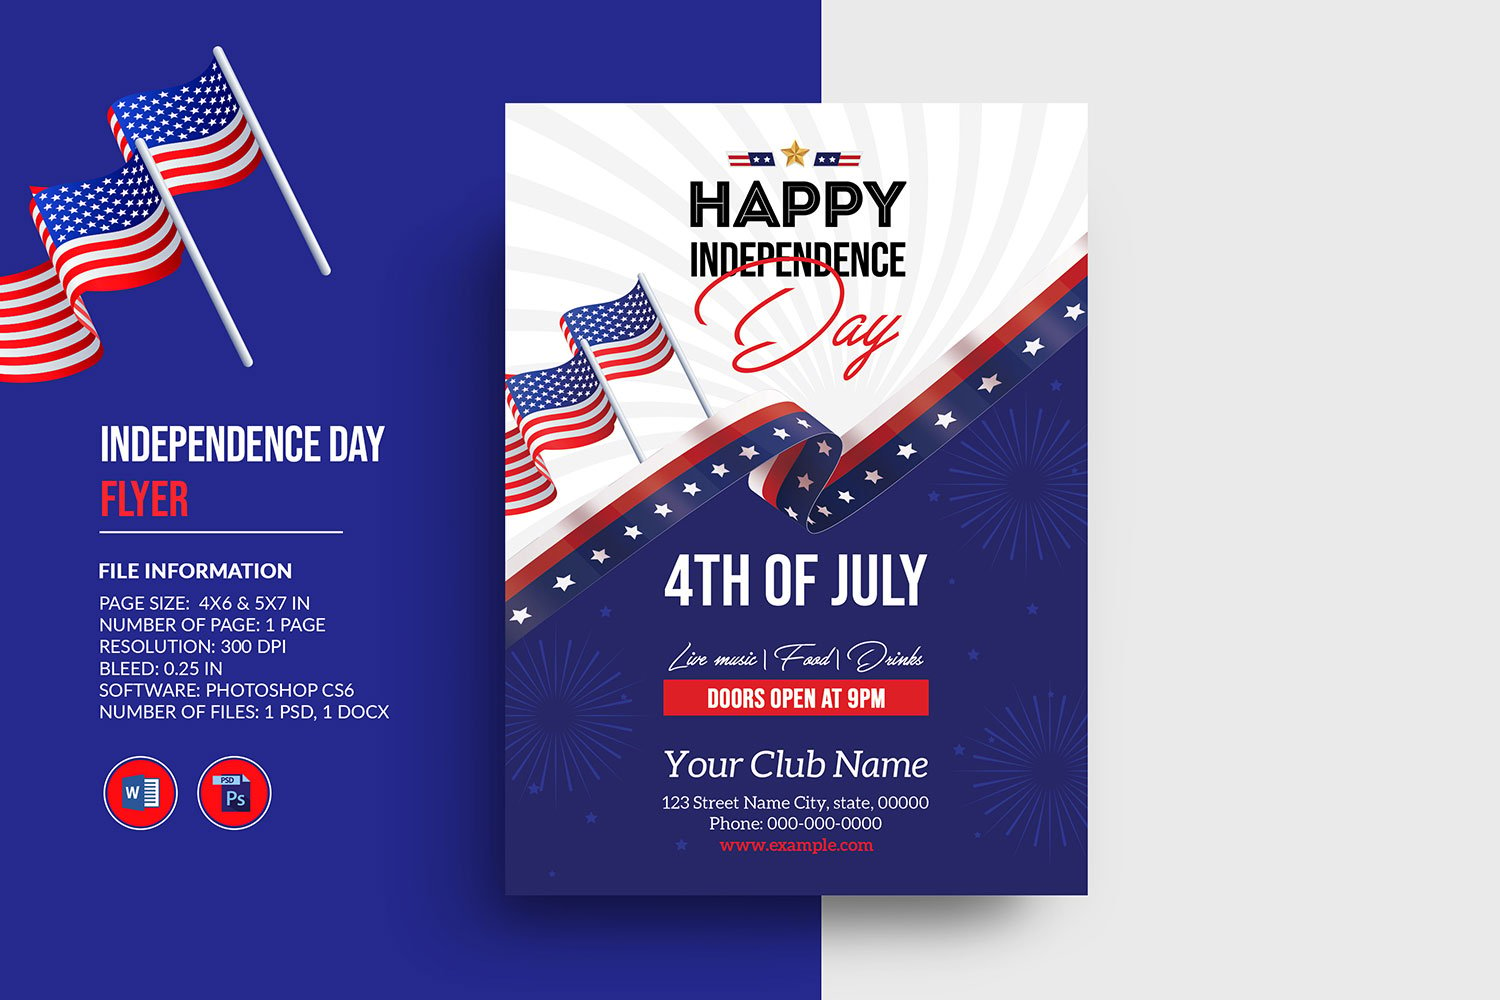 Kit Graphique #336099 July Fourth Web Design - Logo template Preview